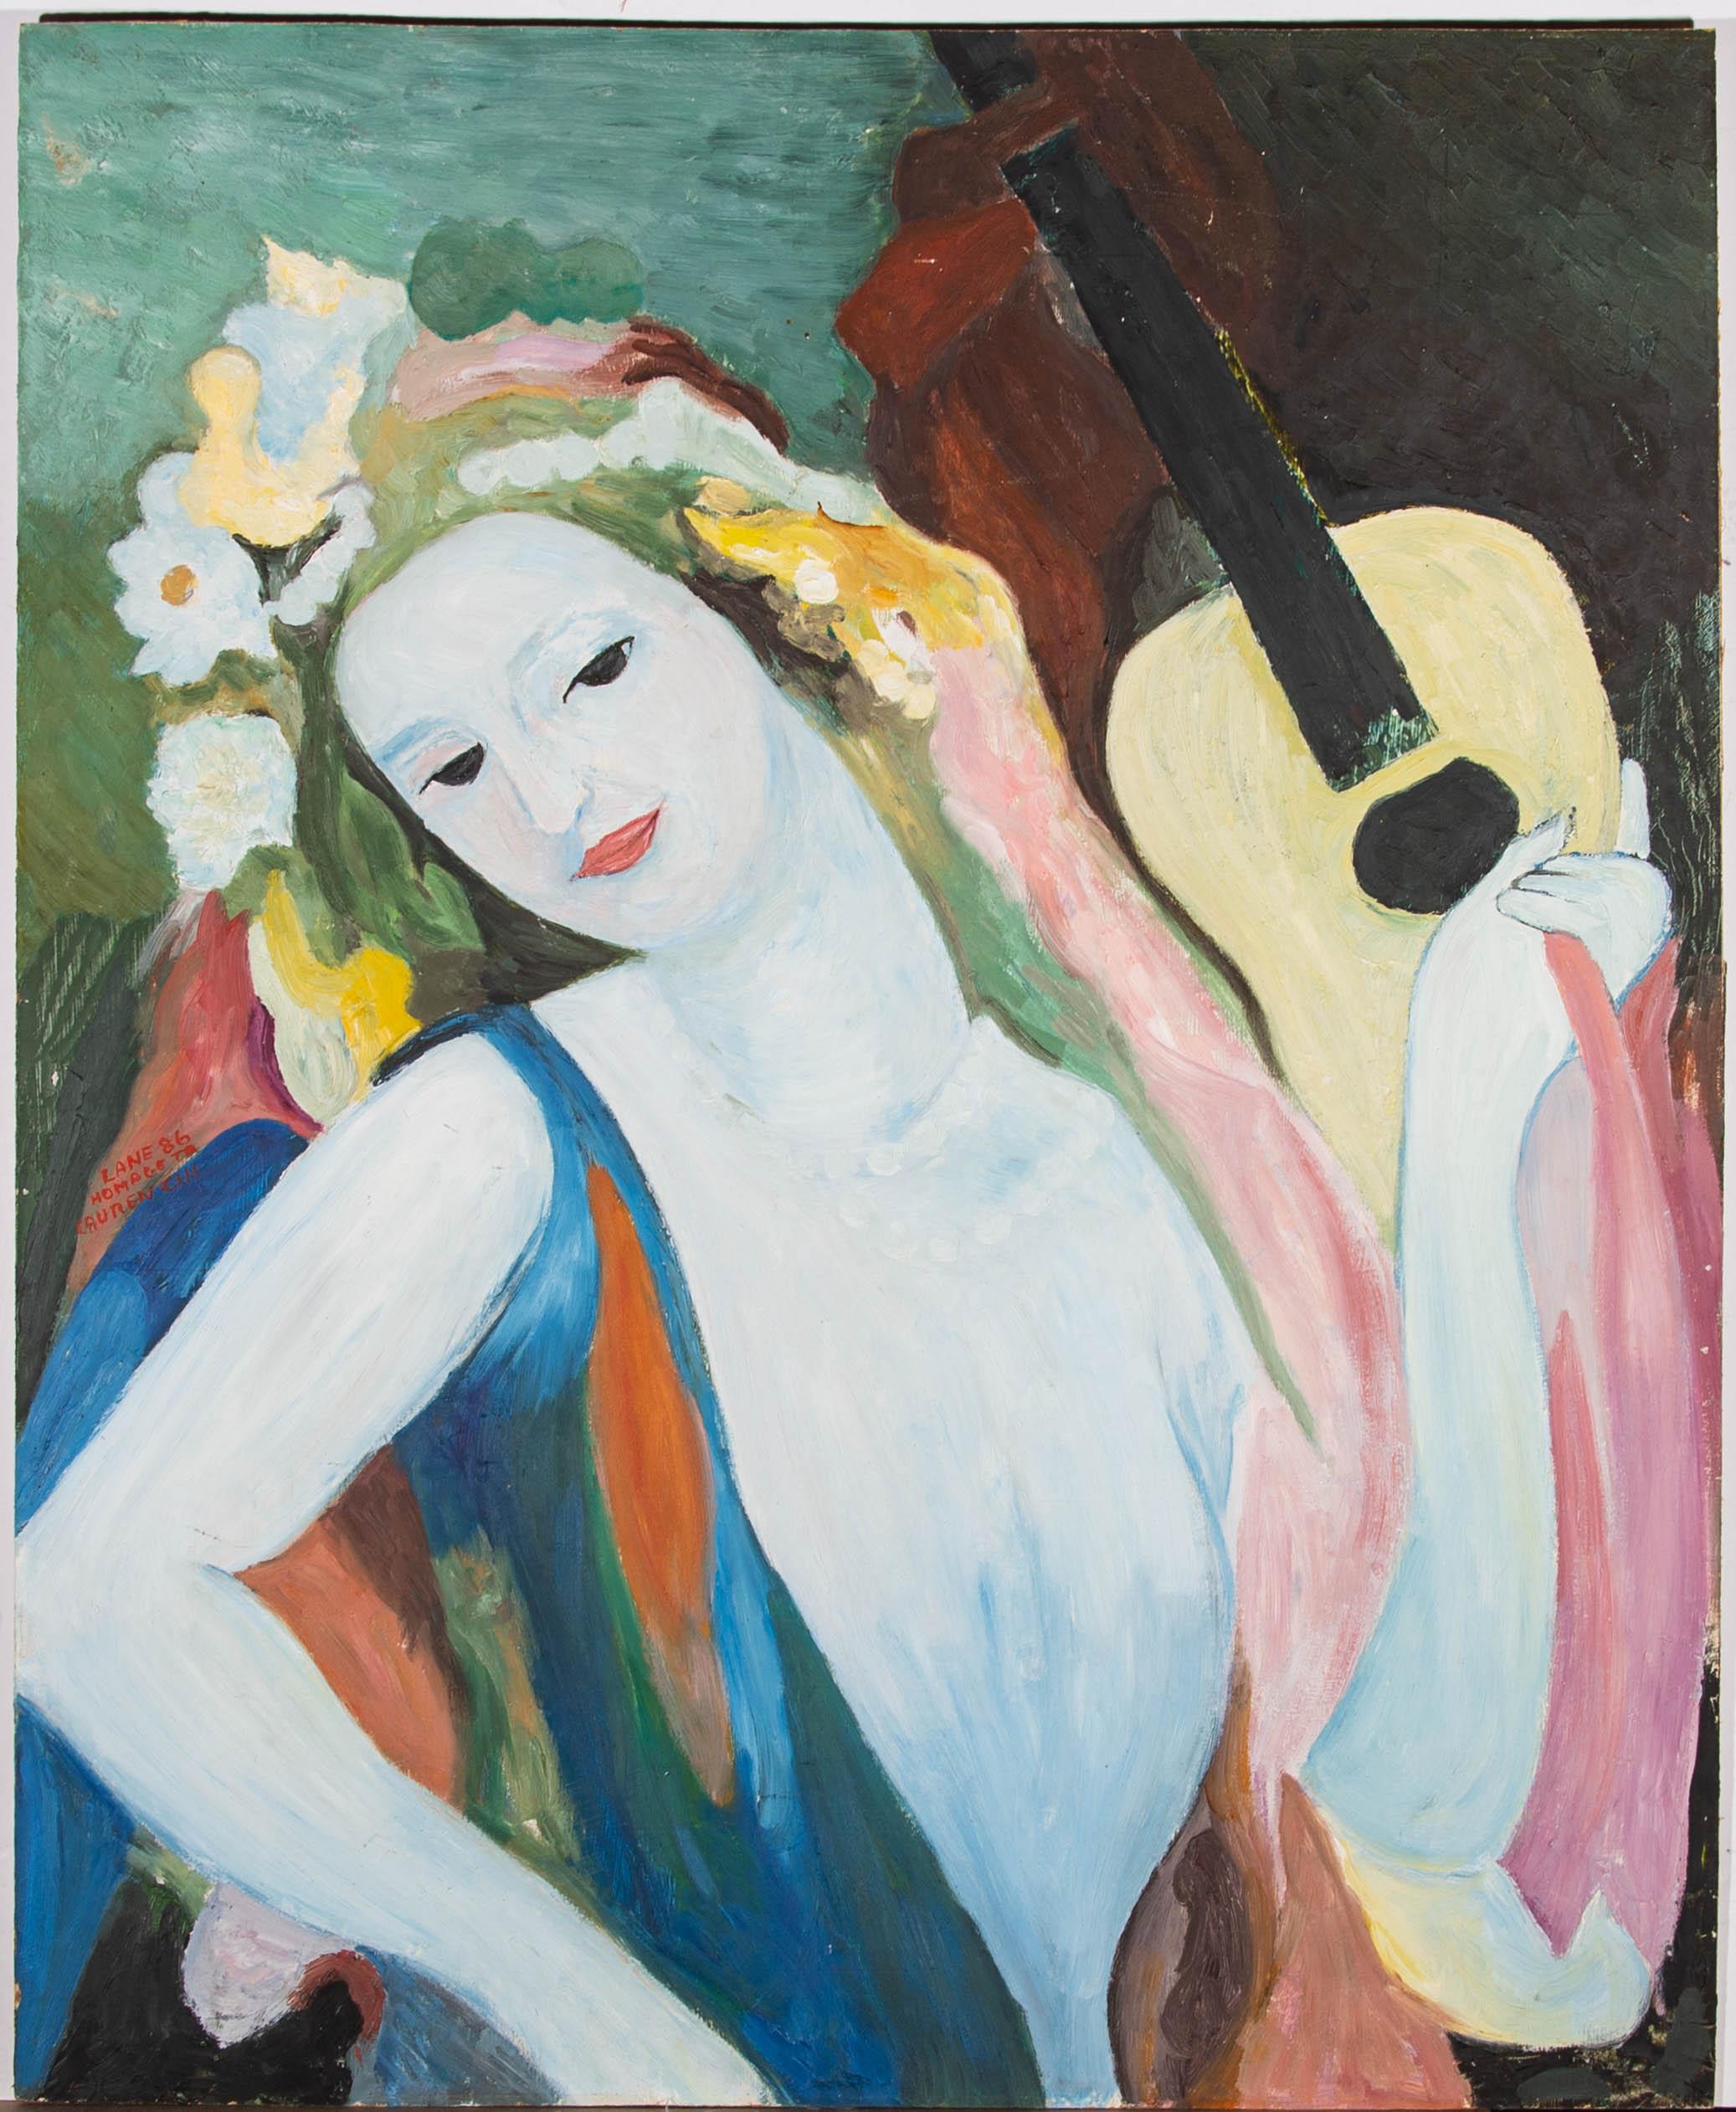 "Lane" in the Marie Laurencin Still-Life Painting - "Lane" in the Manner of Marie Laurencin - 1986 Oil, Flower Maiden With Guitar